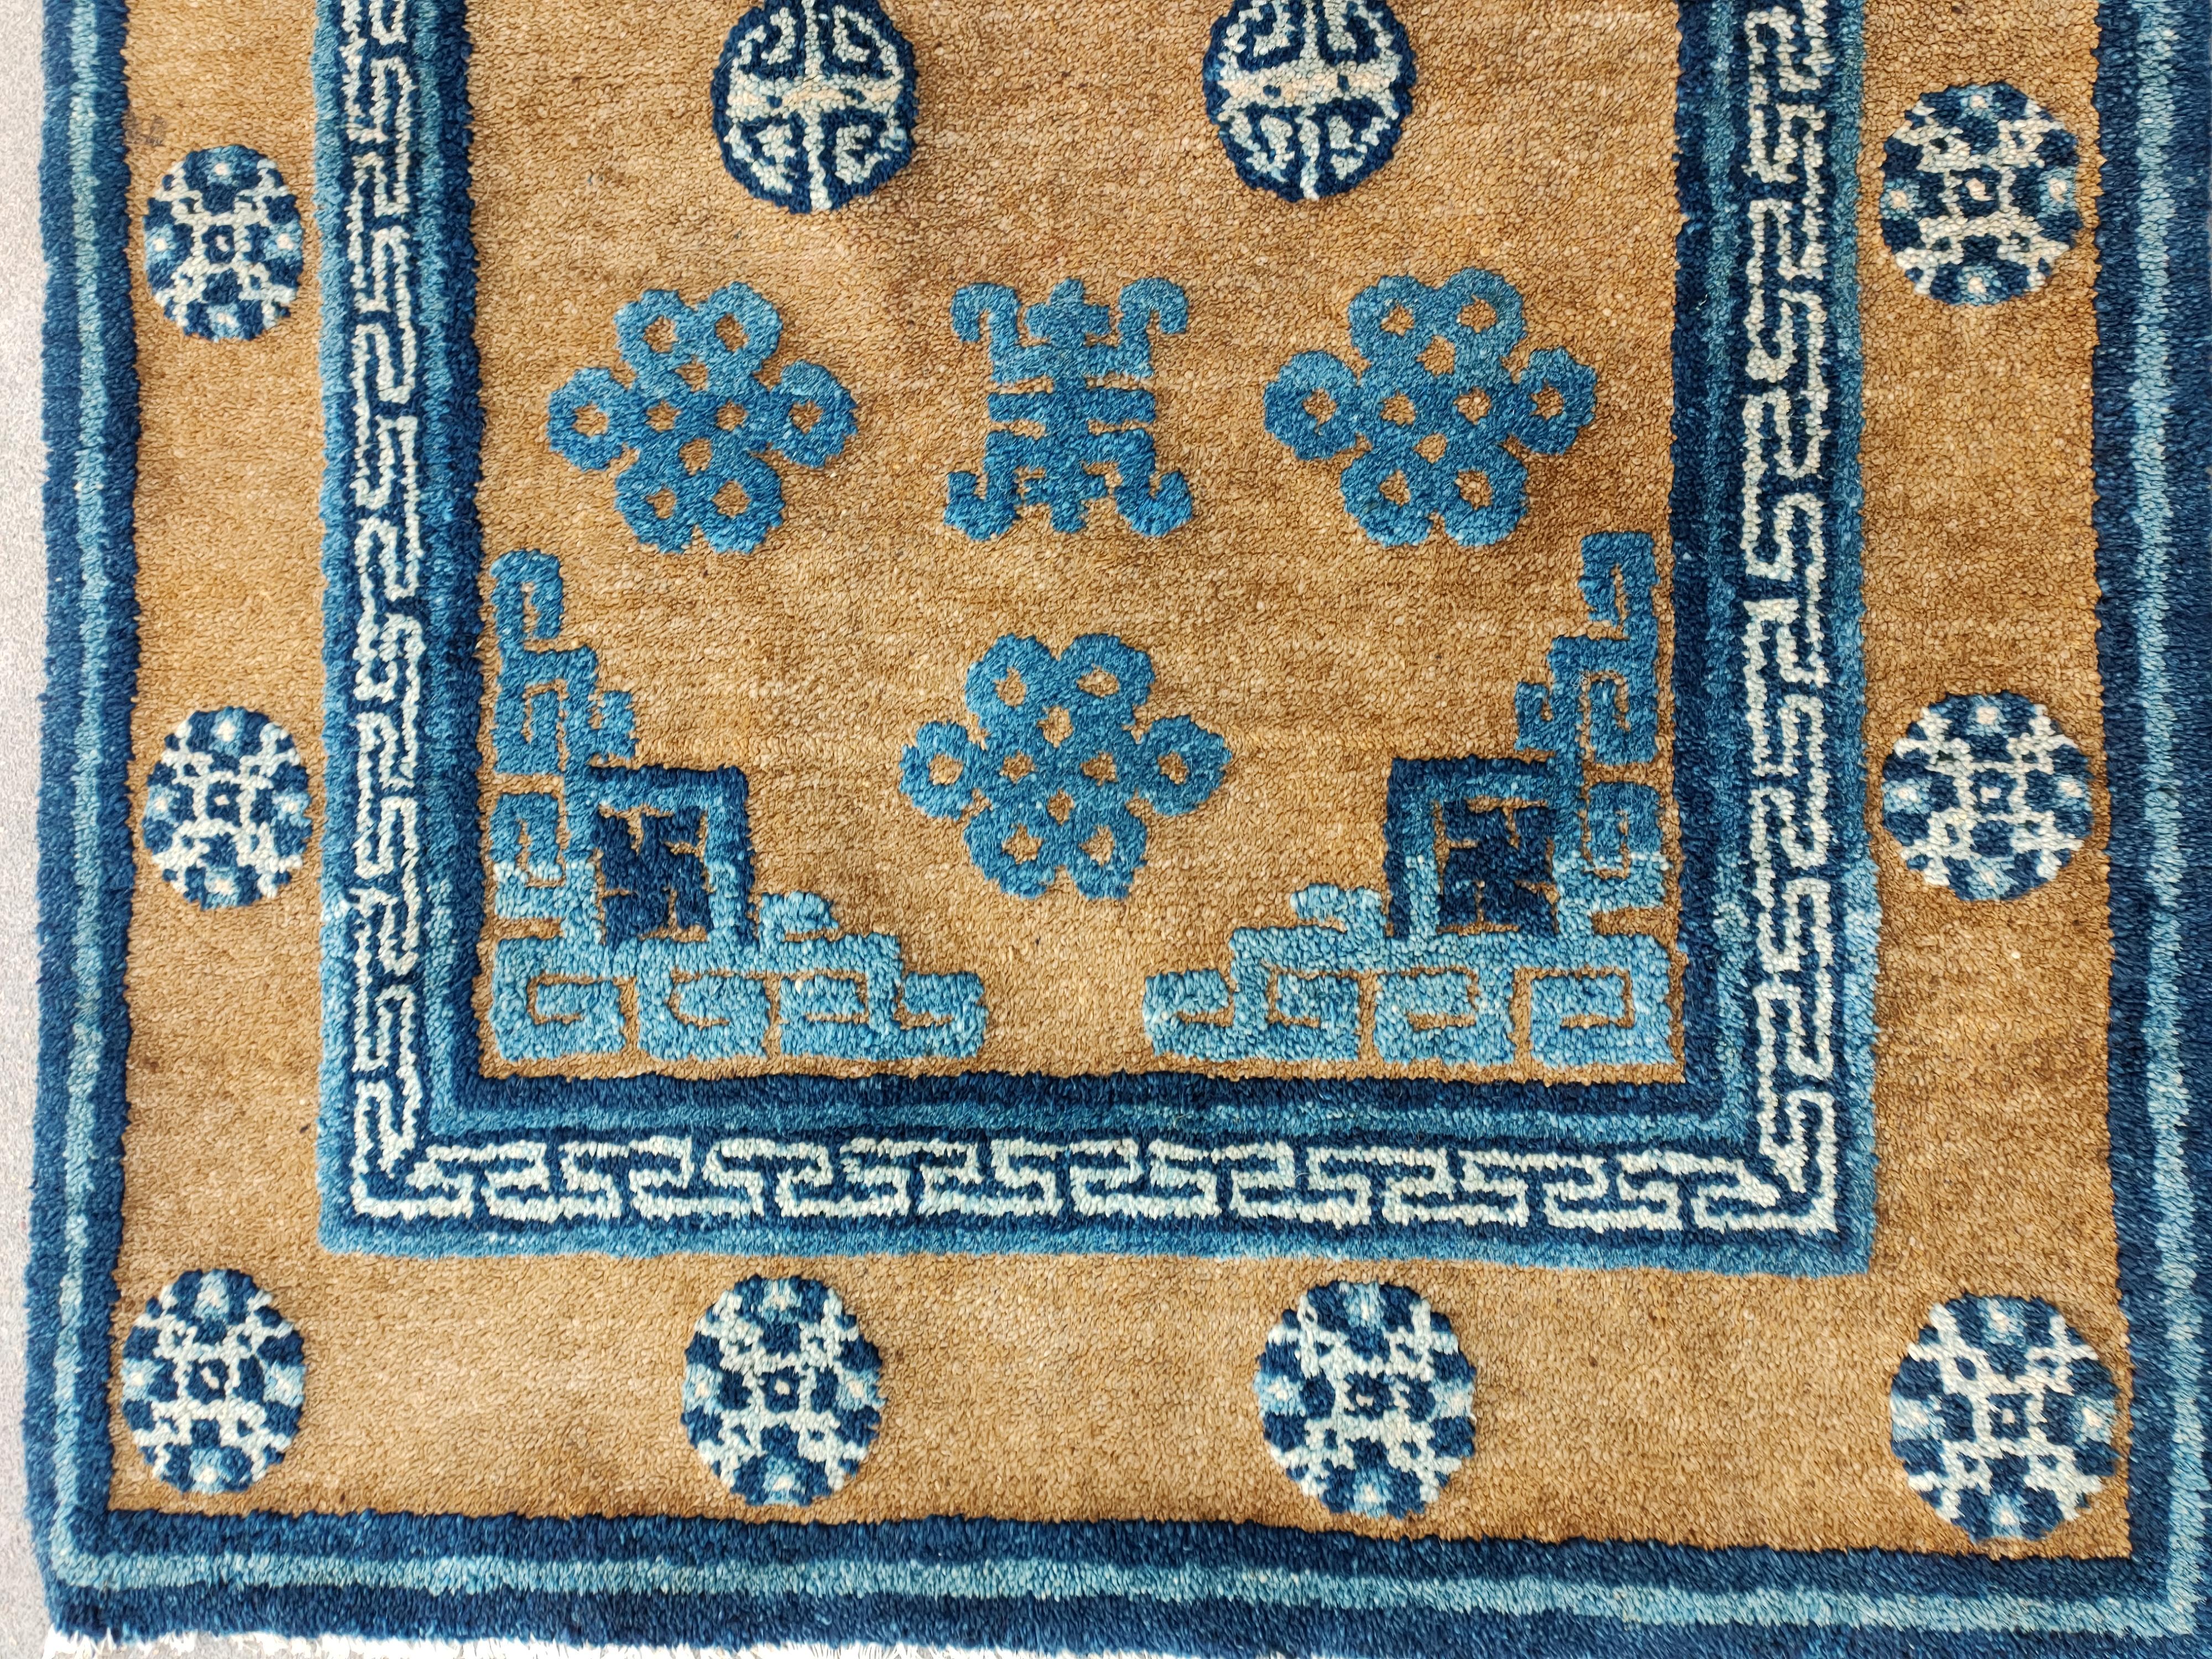 Early 20th Century Chinese Baotou Rug ( 2'2